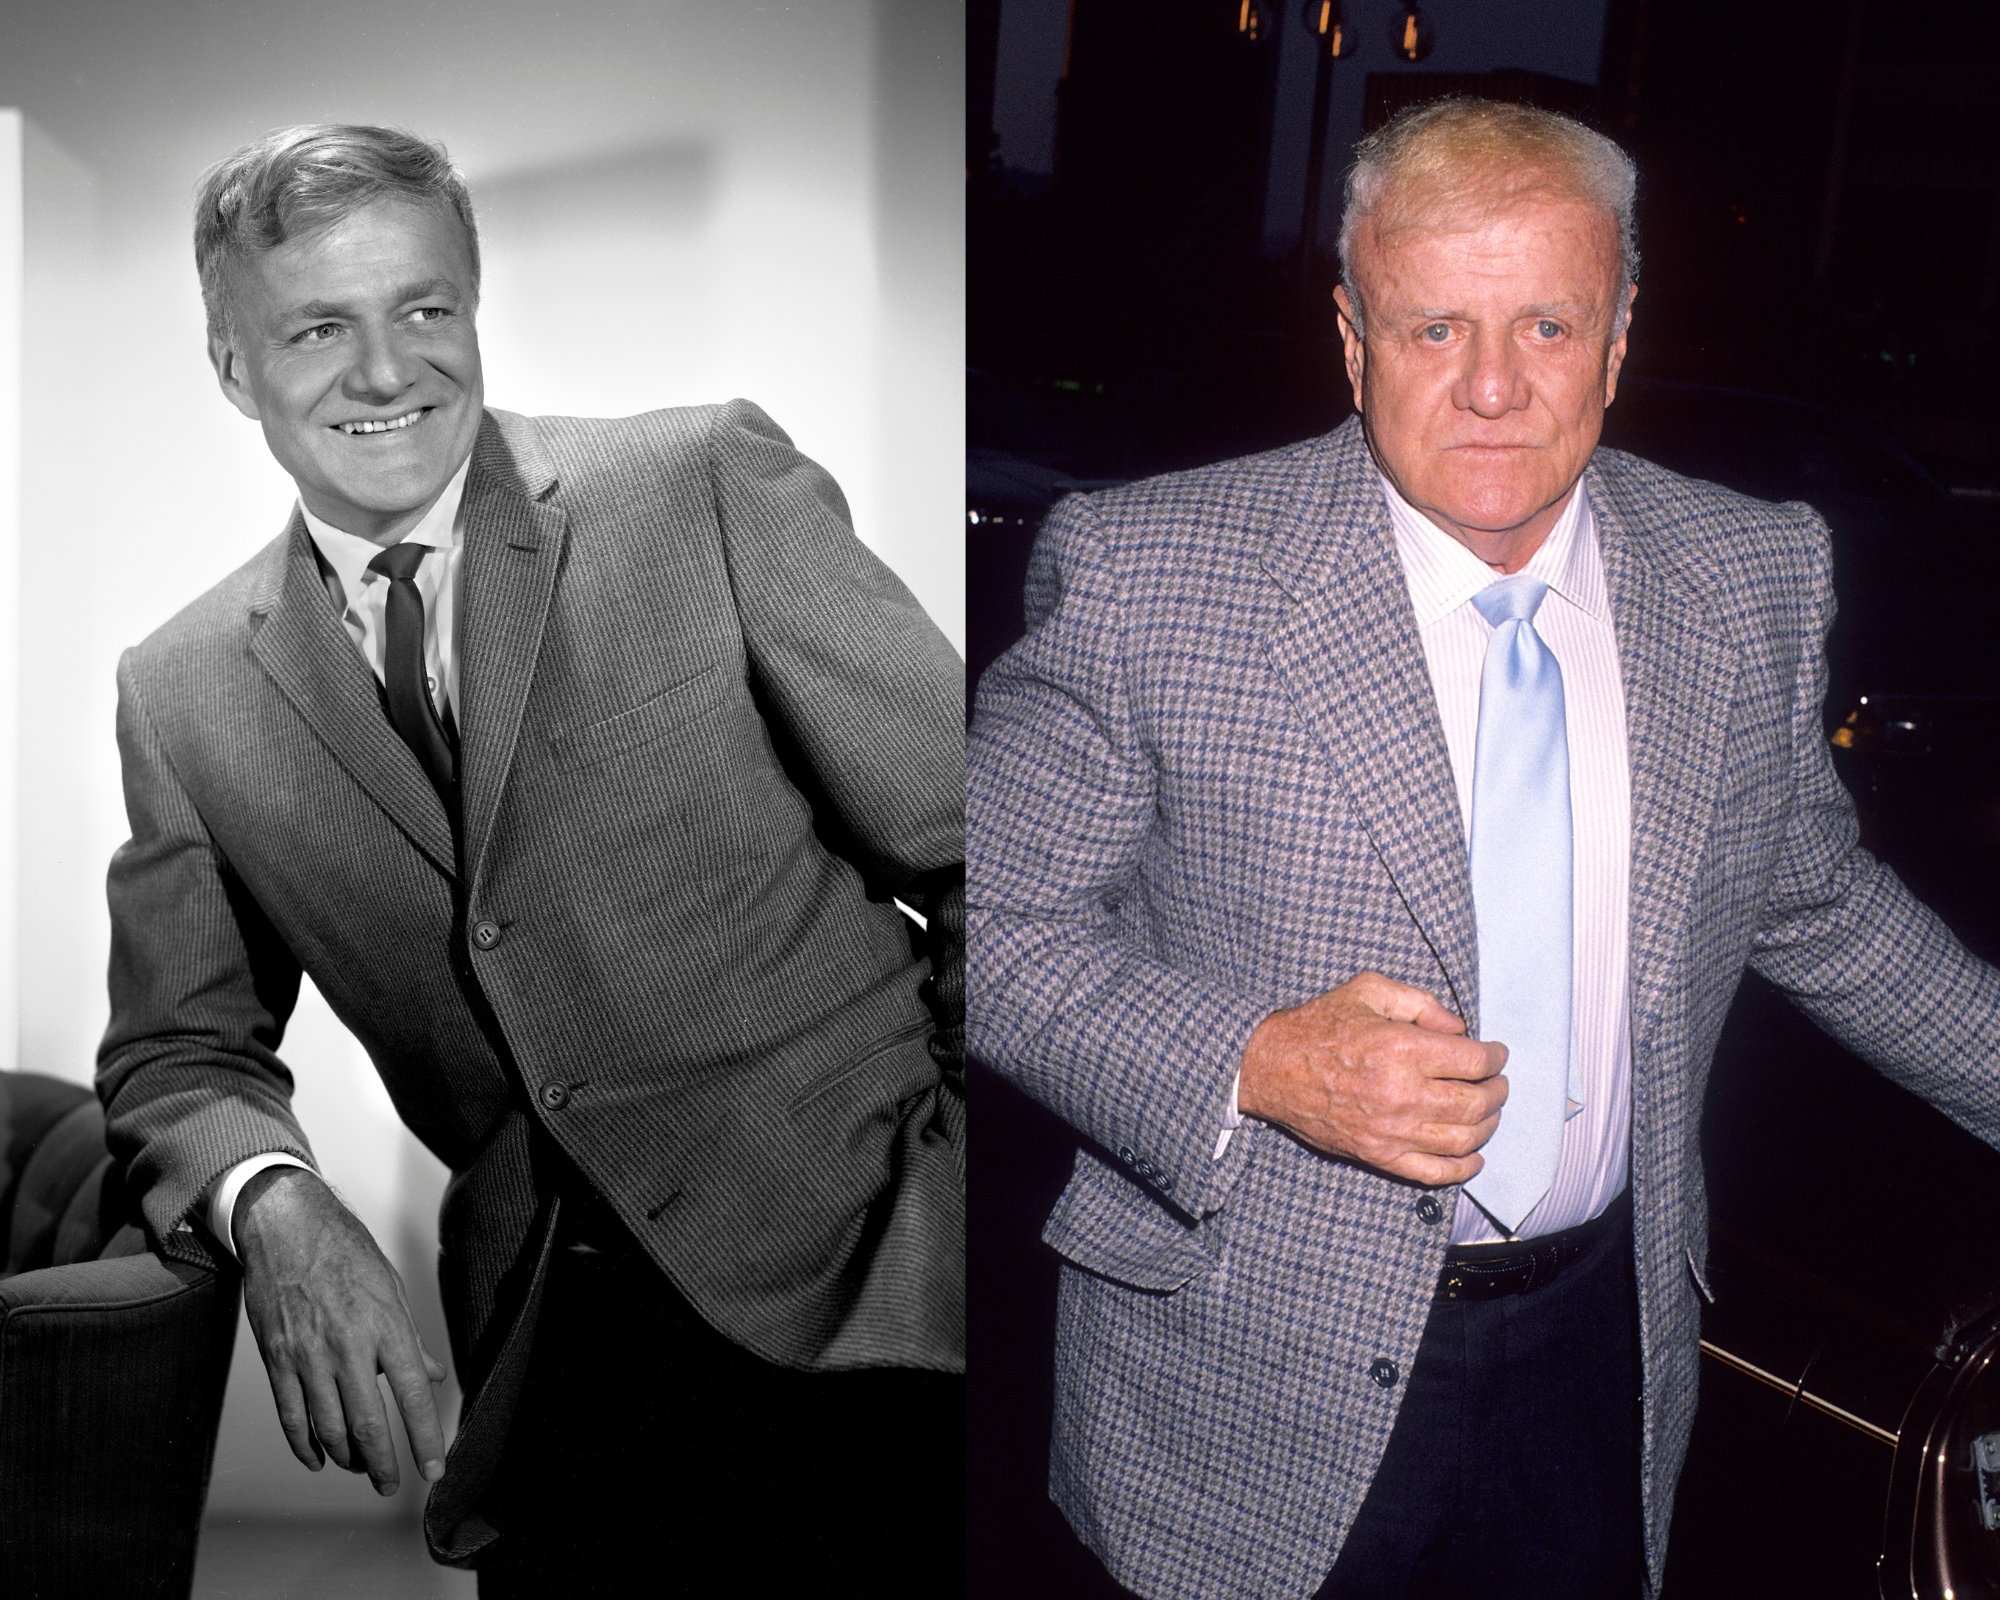 Brian Keith as Bill Davis, March 22, 1966 in Los Angeles, CA. | Actor Brian Keith at an event on April 20, 1990 at the Century Plaza Hotel in Century City, California. | Source: Getty Images